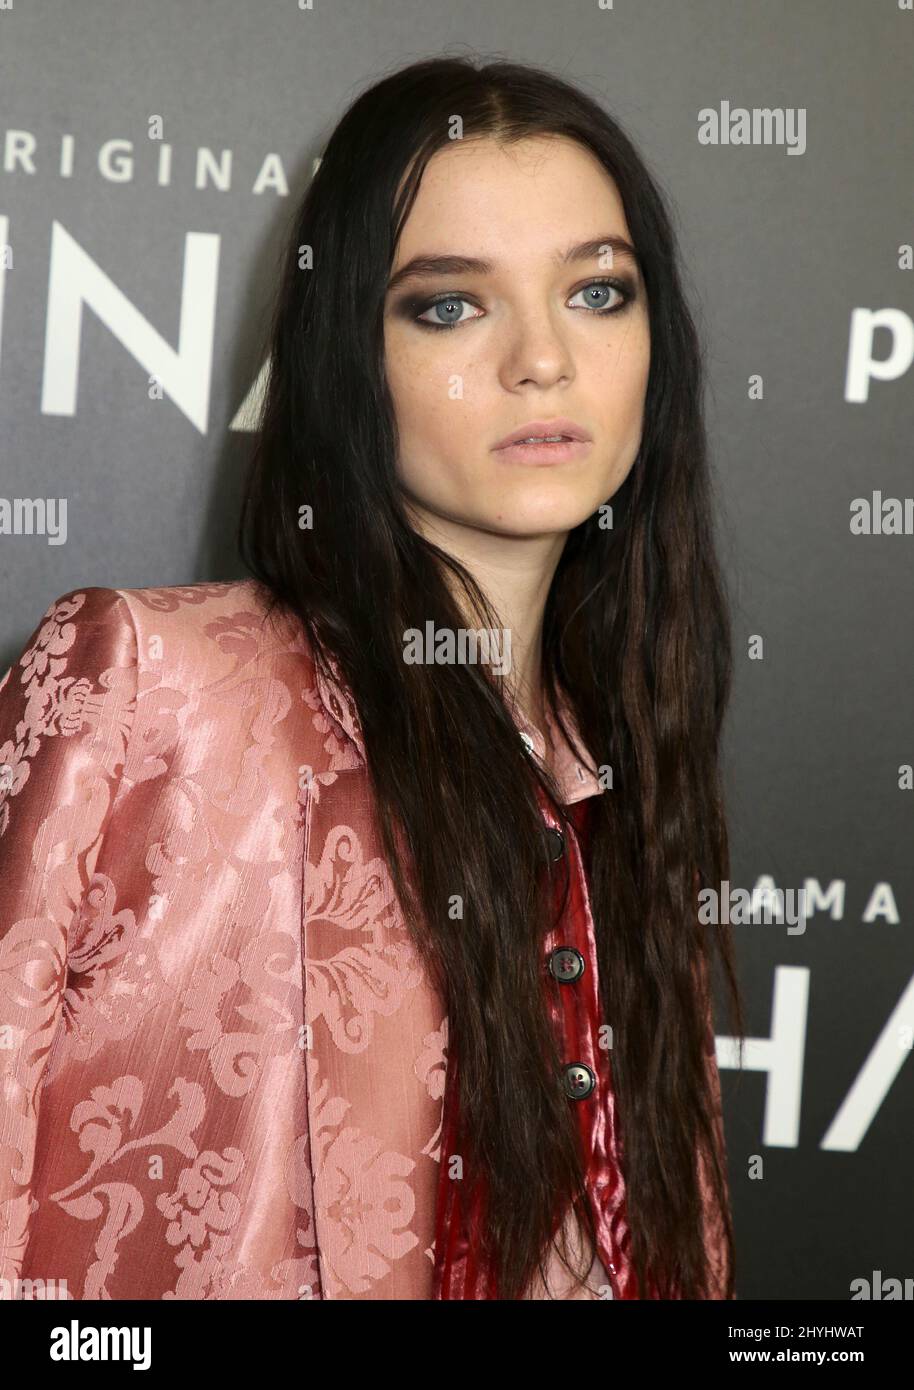 Esme Creed-Miles attending the 'Hanna' New York Premiere held at The Whitby Hotel on March 21, 2019 in New York City, NY Stock Photo